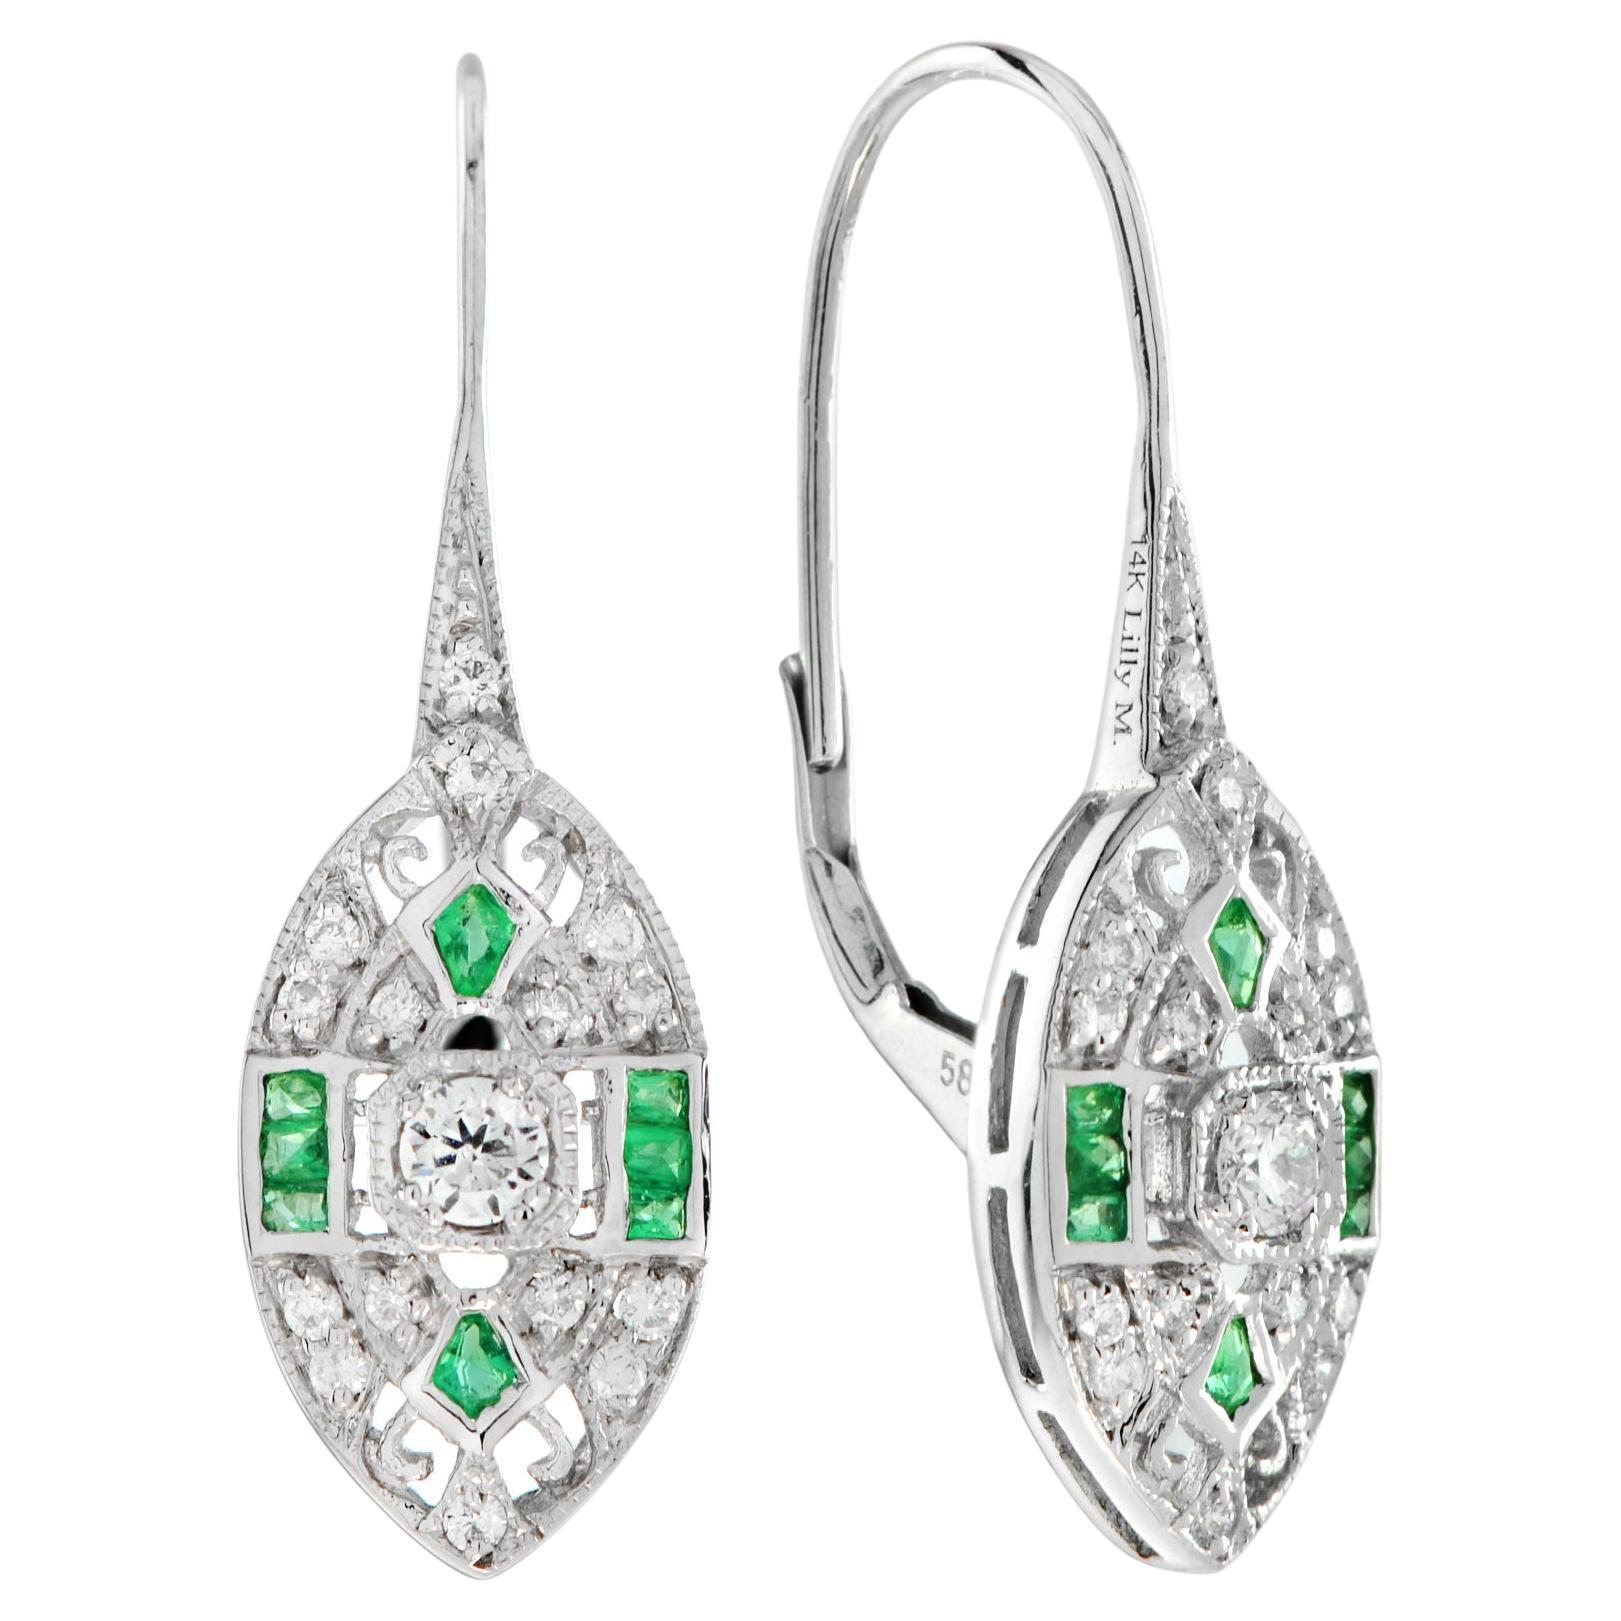 Majesté Art Deco Style Round Diamond with Emerald Earrings in 14K White Gold